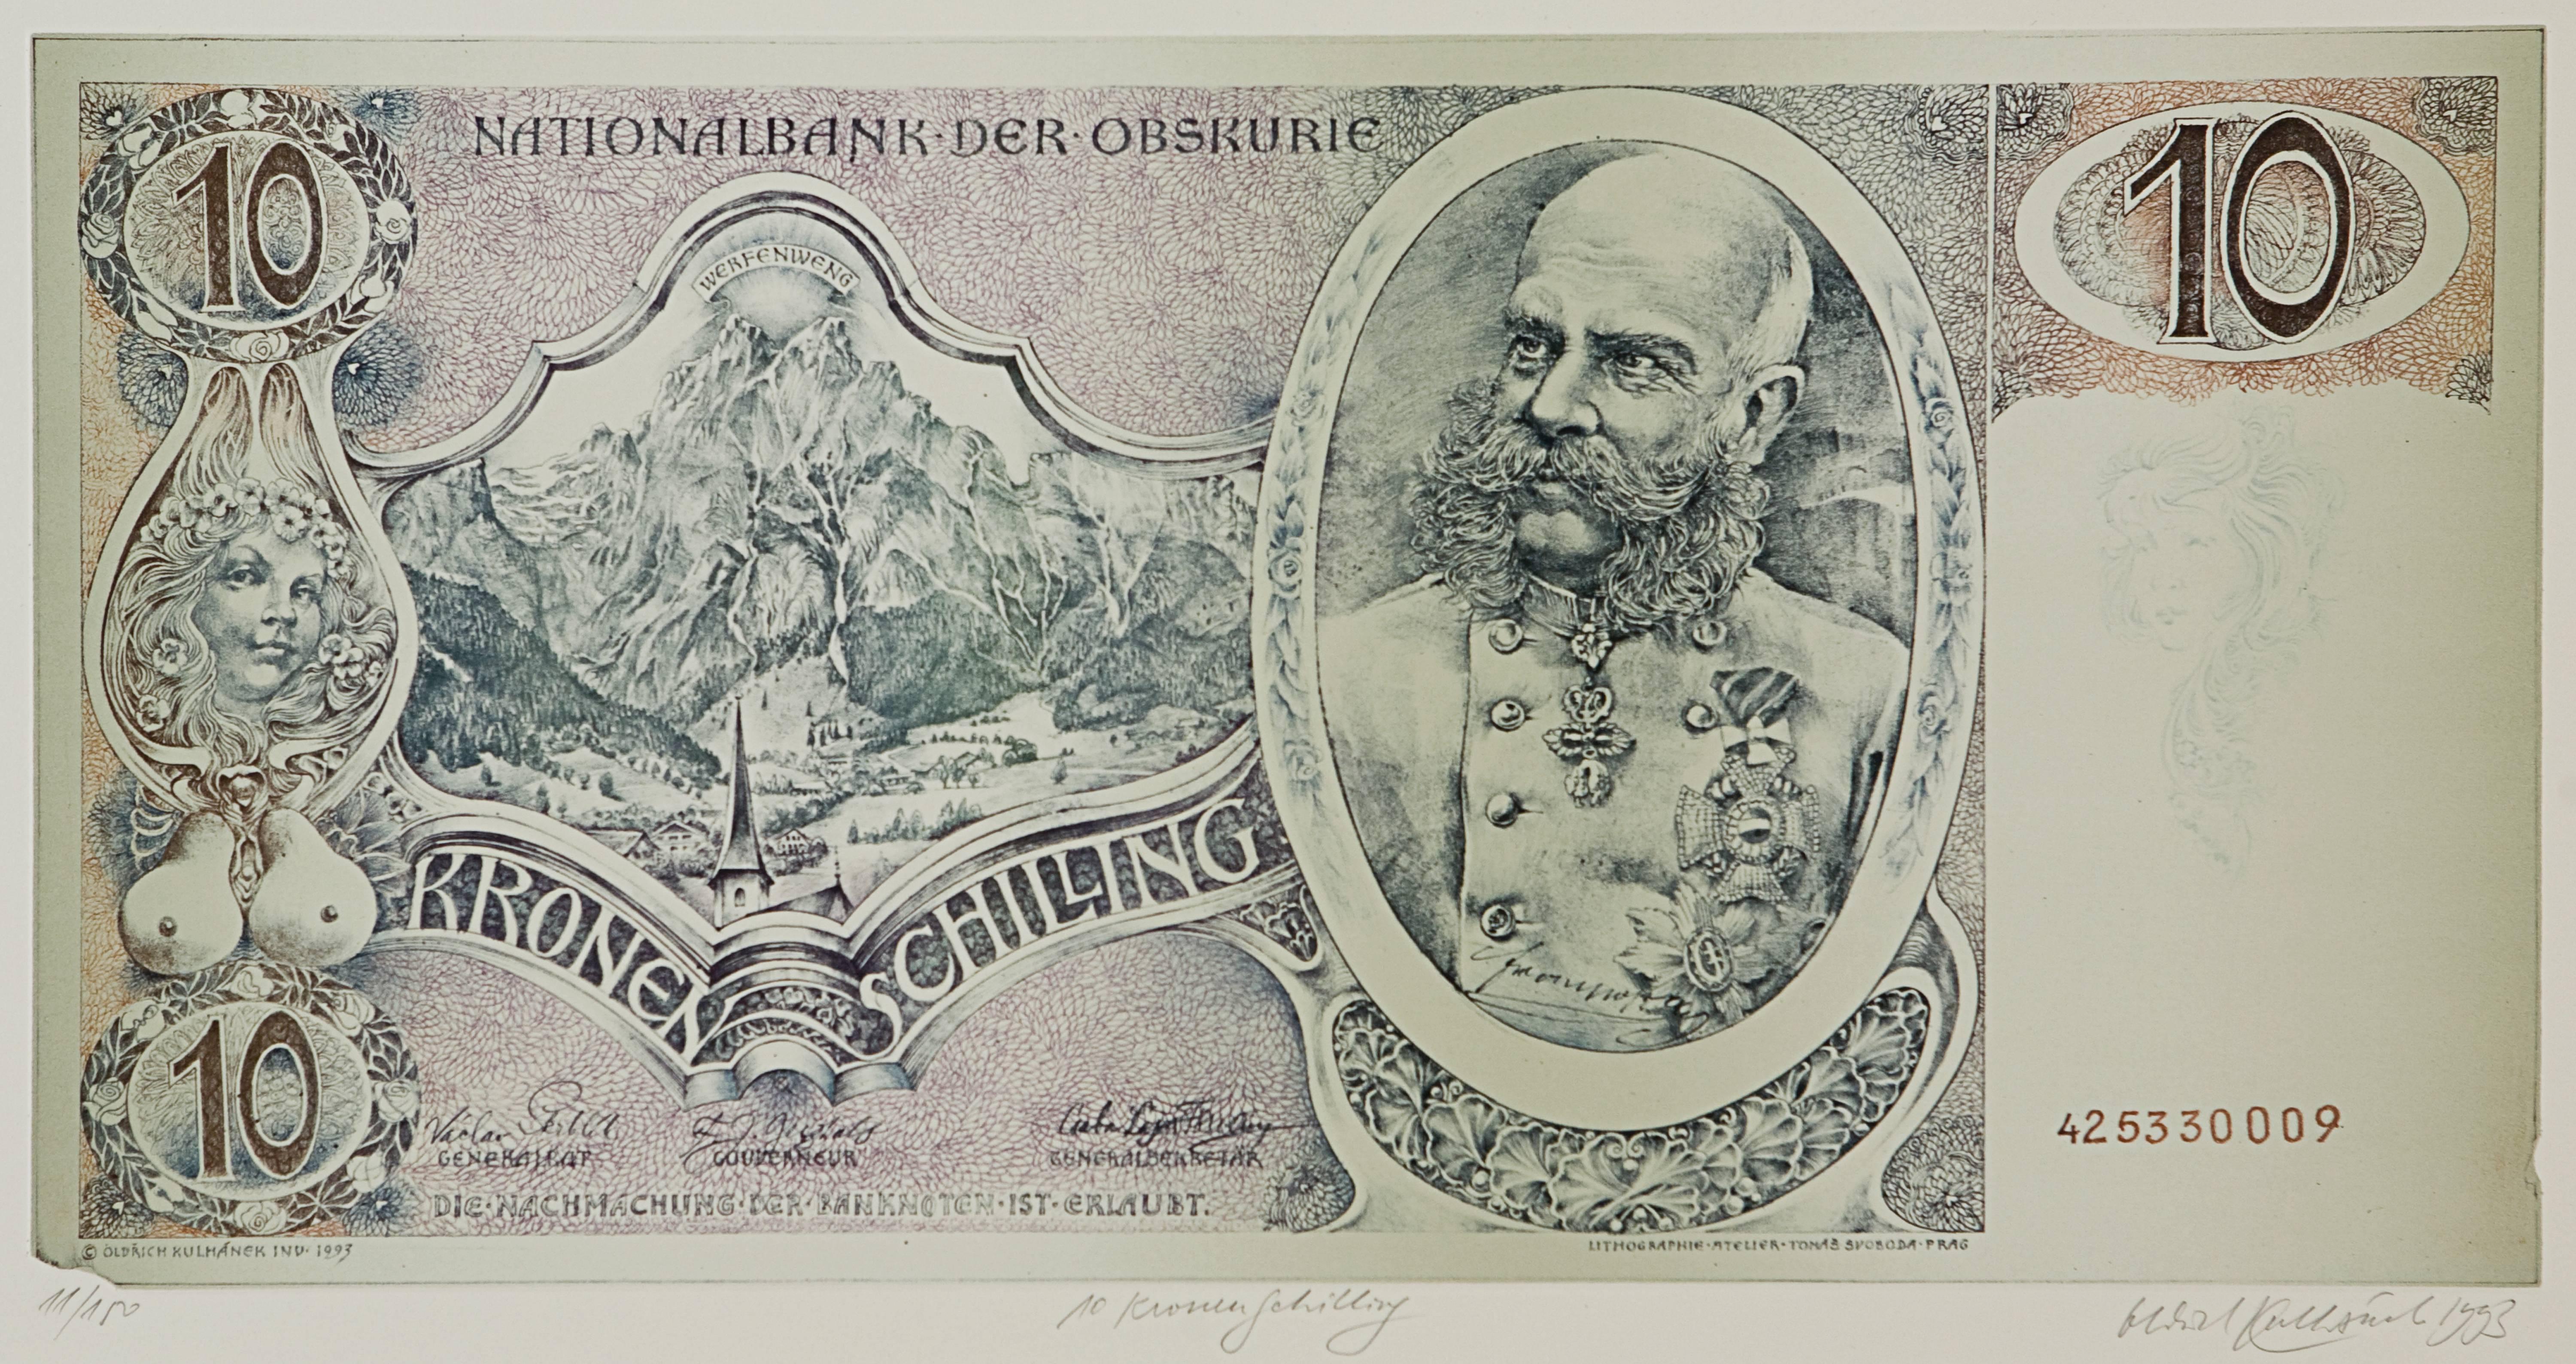 4 Color Lithographs from the Funny Money Series - Print by Oldrich Kulhánek